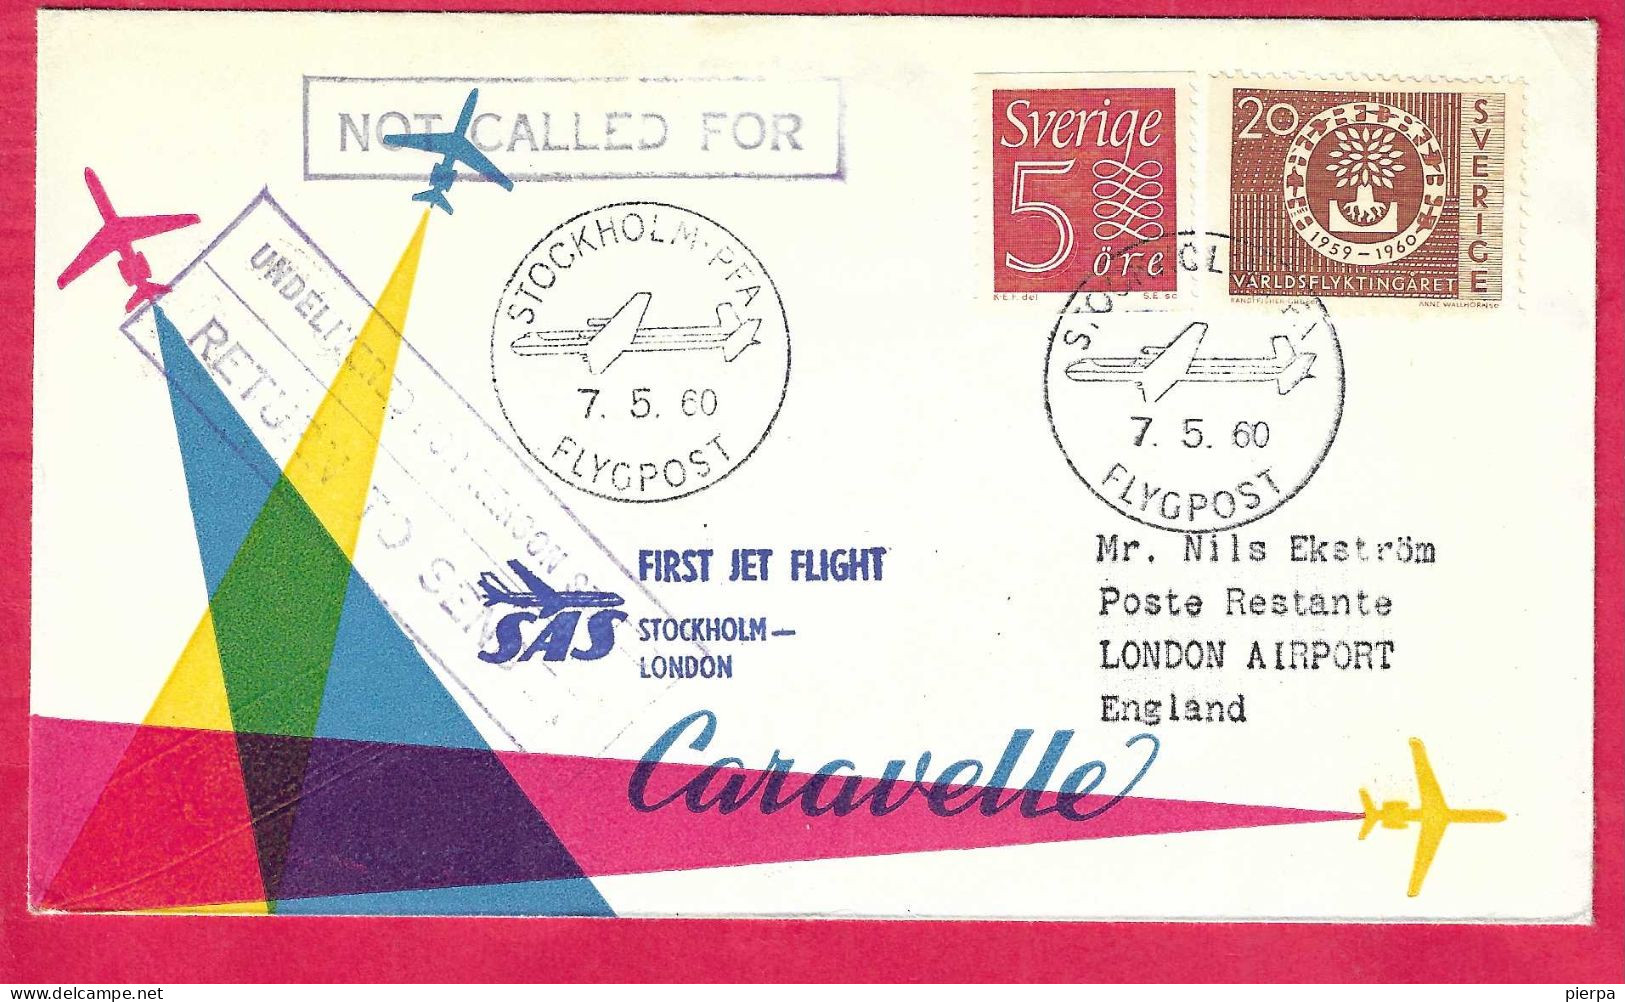 SVERIGE - FIRST CARAVELLE FLIGHT SAS  FROM STOCKHOLM TO LONDON *7.5.60* ON OFFICIAL COVER - Cartas & Documentos